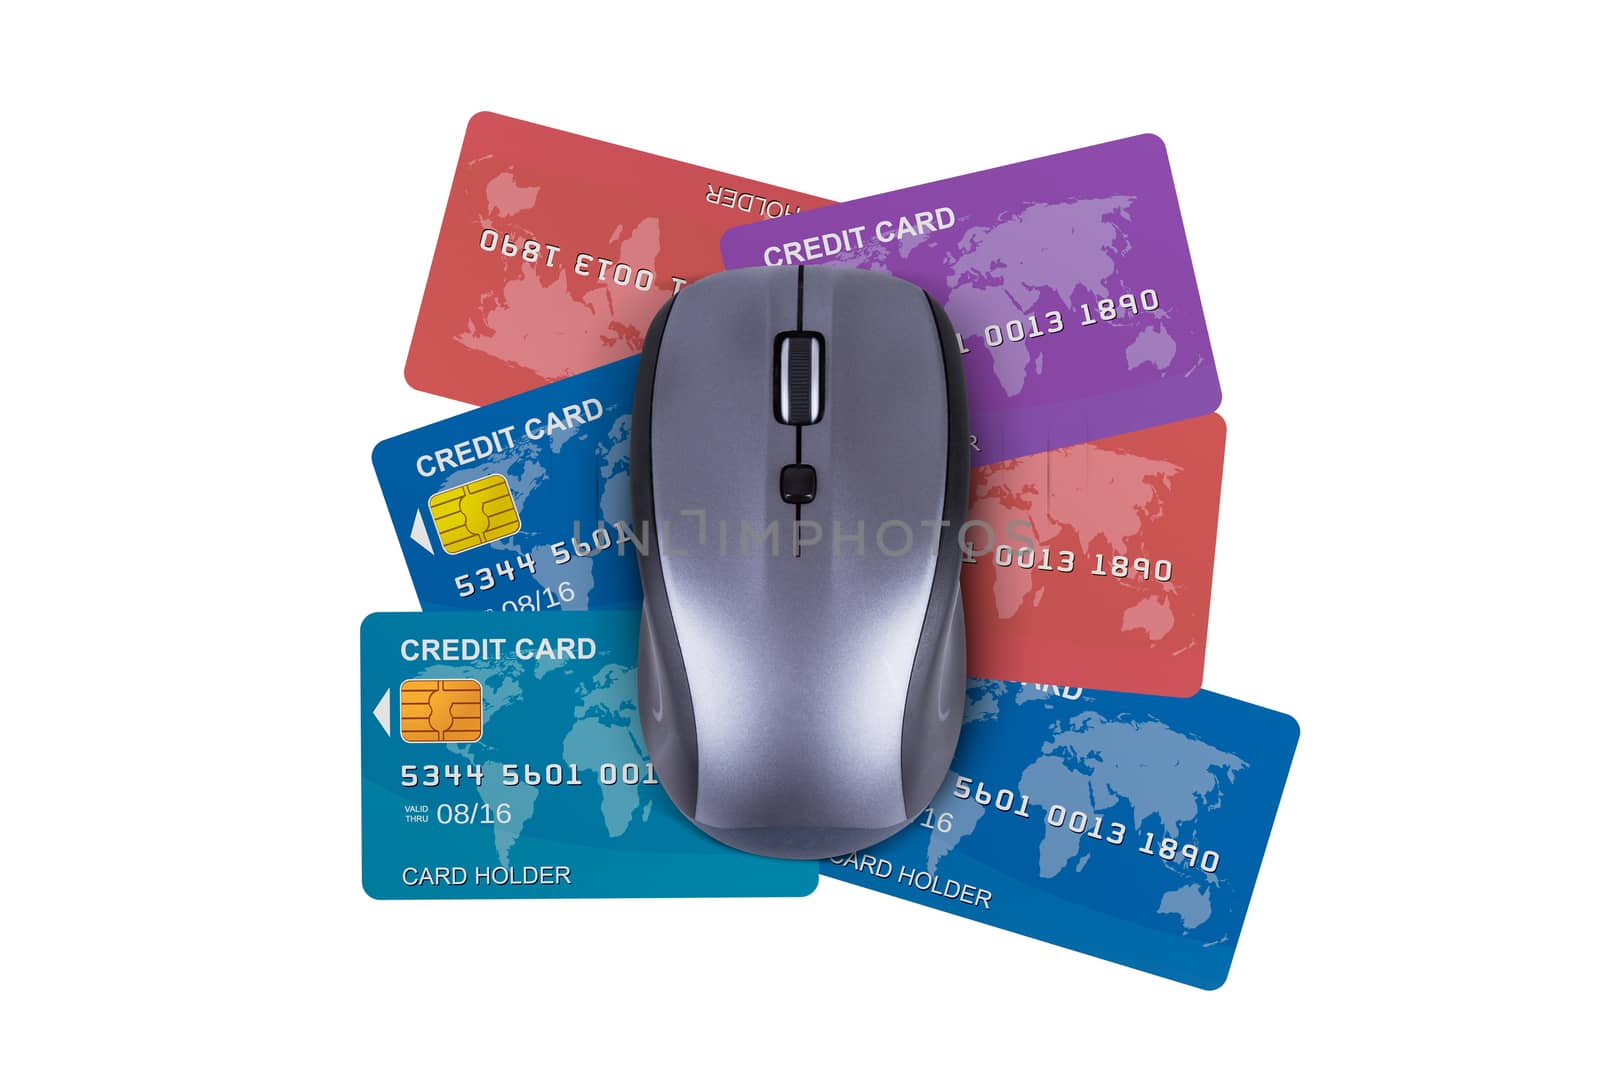 Finance concept, colorful credit cards under computer mouse, isolated on white background.